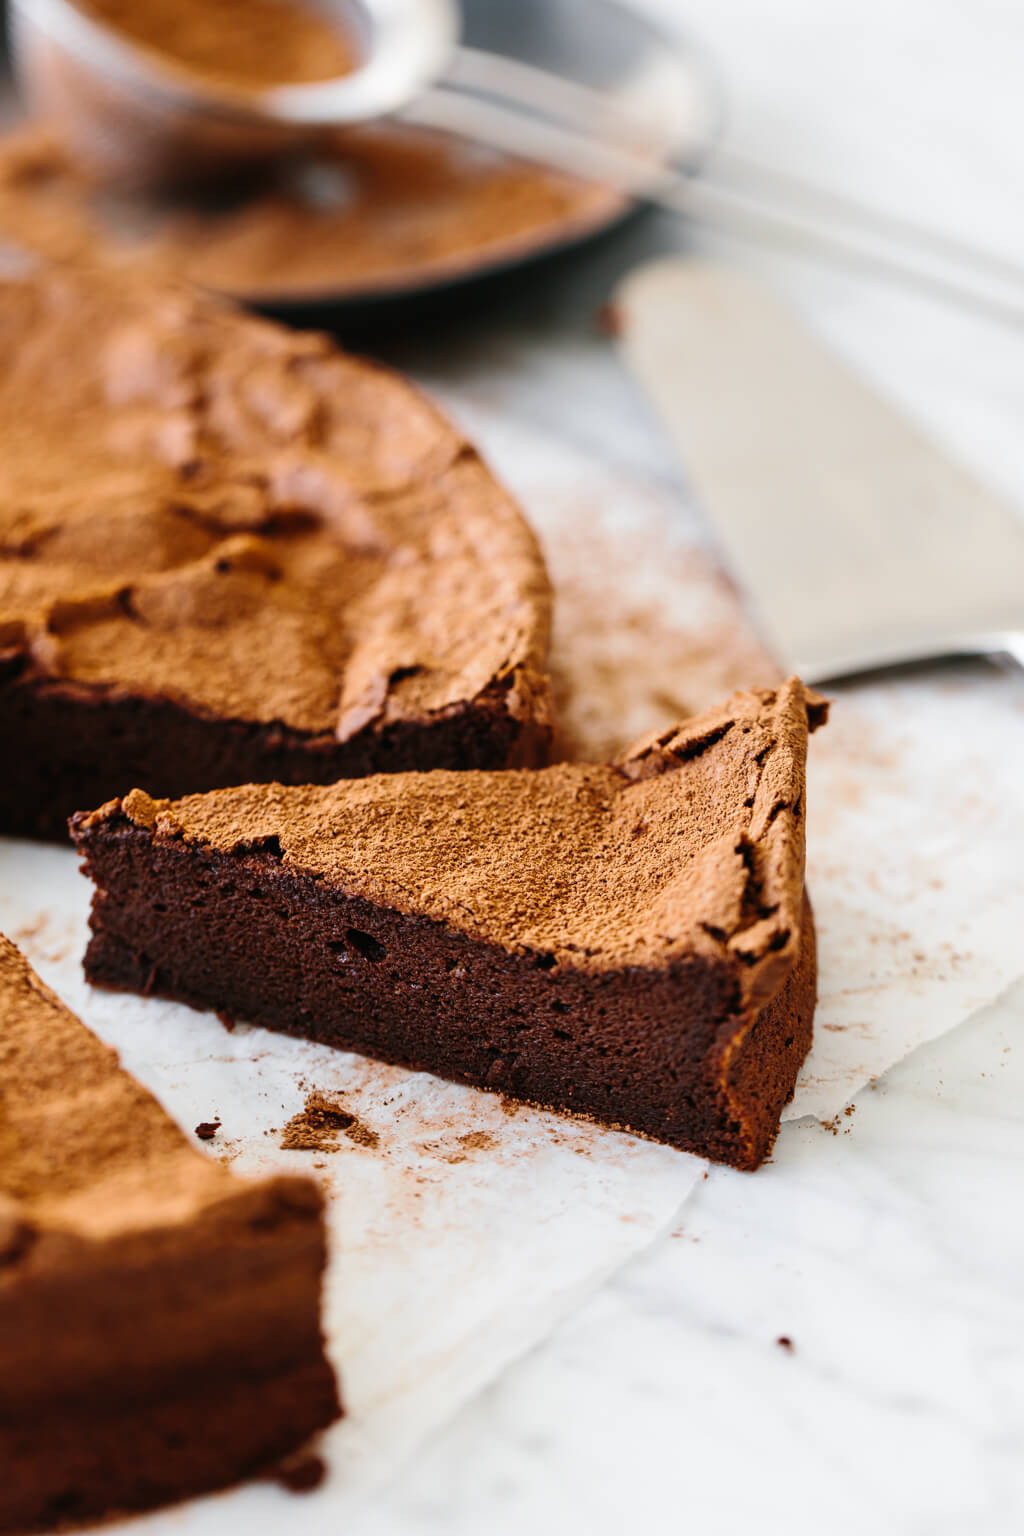 Flourless Chocolate Cake with Cocoa Powder Elegant Flourless Chocolate Cake No Refined Sugar